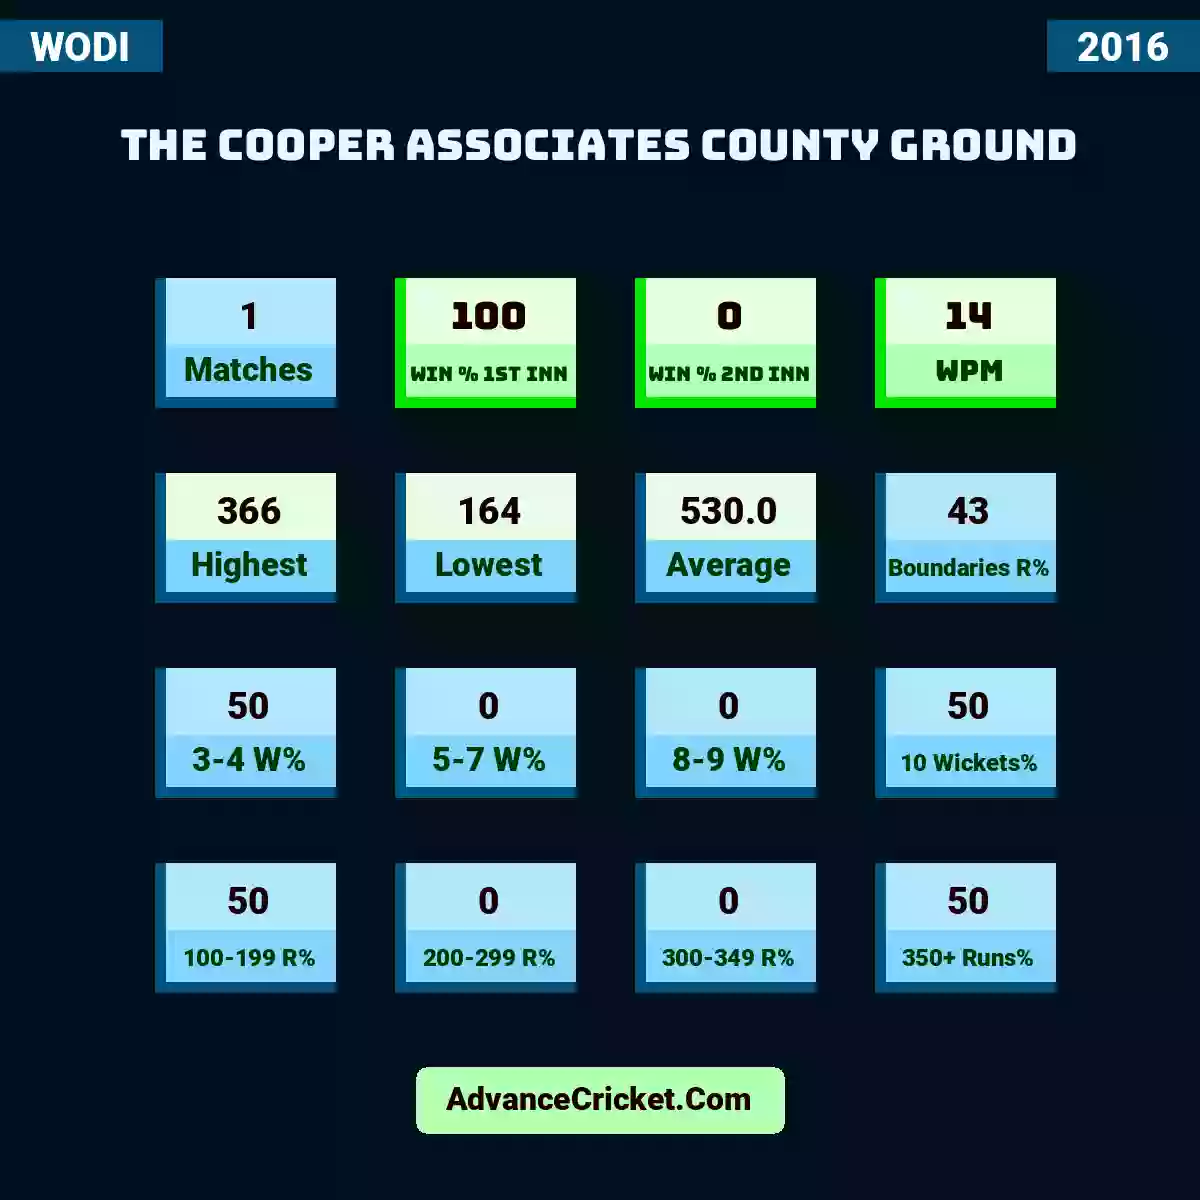 Image showing The Cooper Associates County Ground with Matches: 1, Win % 1st Inn: 100, Win % 2nd Inn: 0, WPM: 14, Highest: 366, Lowest: 164, Average: 530.0, Boundaries R%: 43, 3-4 W%: 50, 5-7 W%: 0, 8-9 W%: 0, 10 Wickets%: 50, 100-199 R%: 50, 200-299 R%: 0, 300-349 R%: 0, 350+ Runs%: 50.